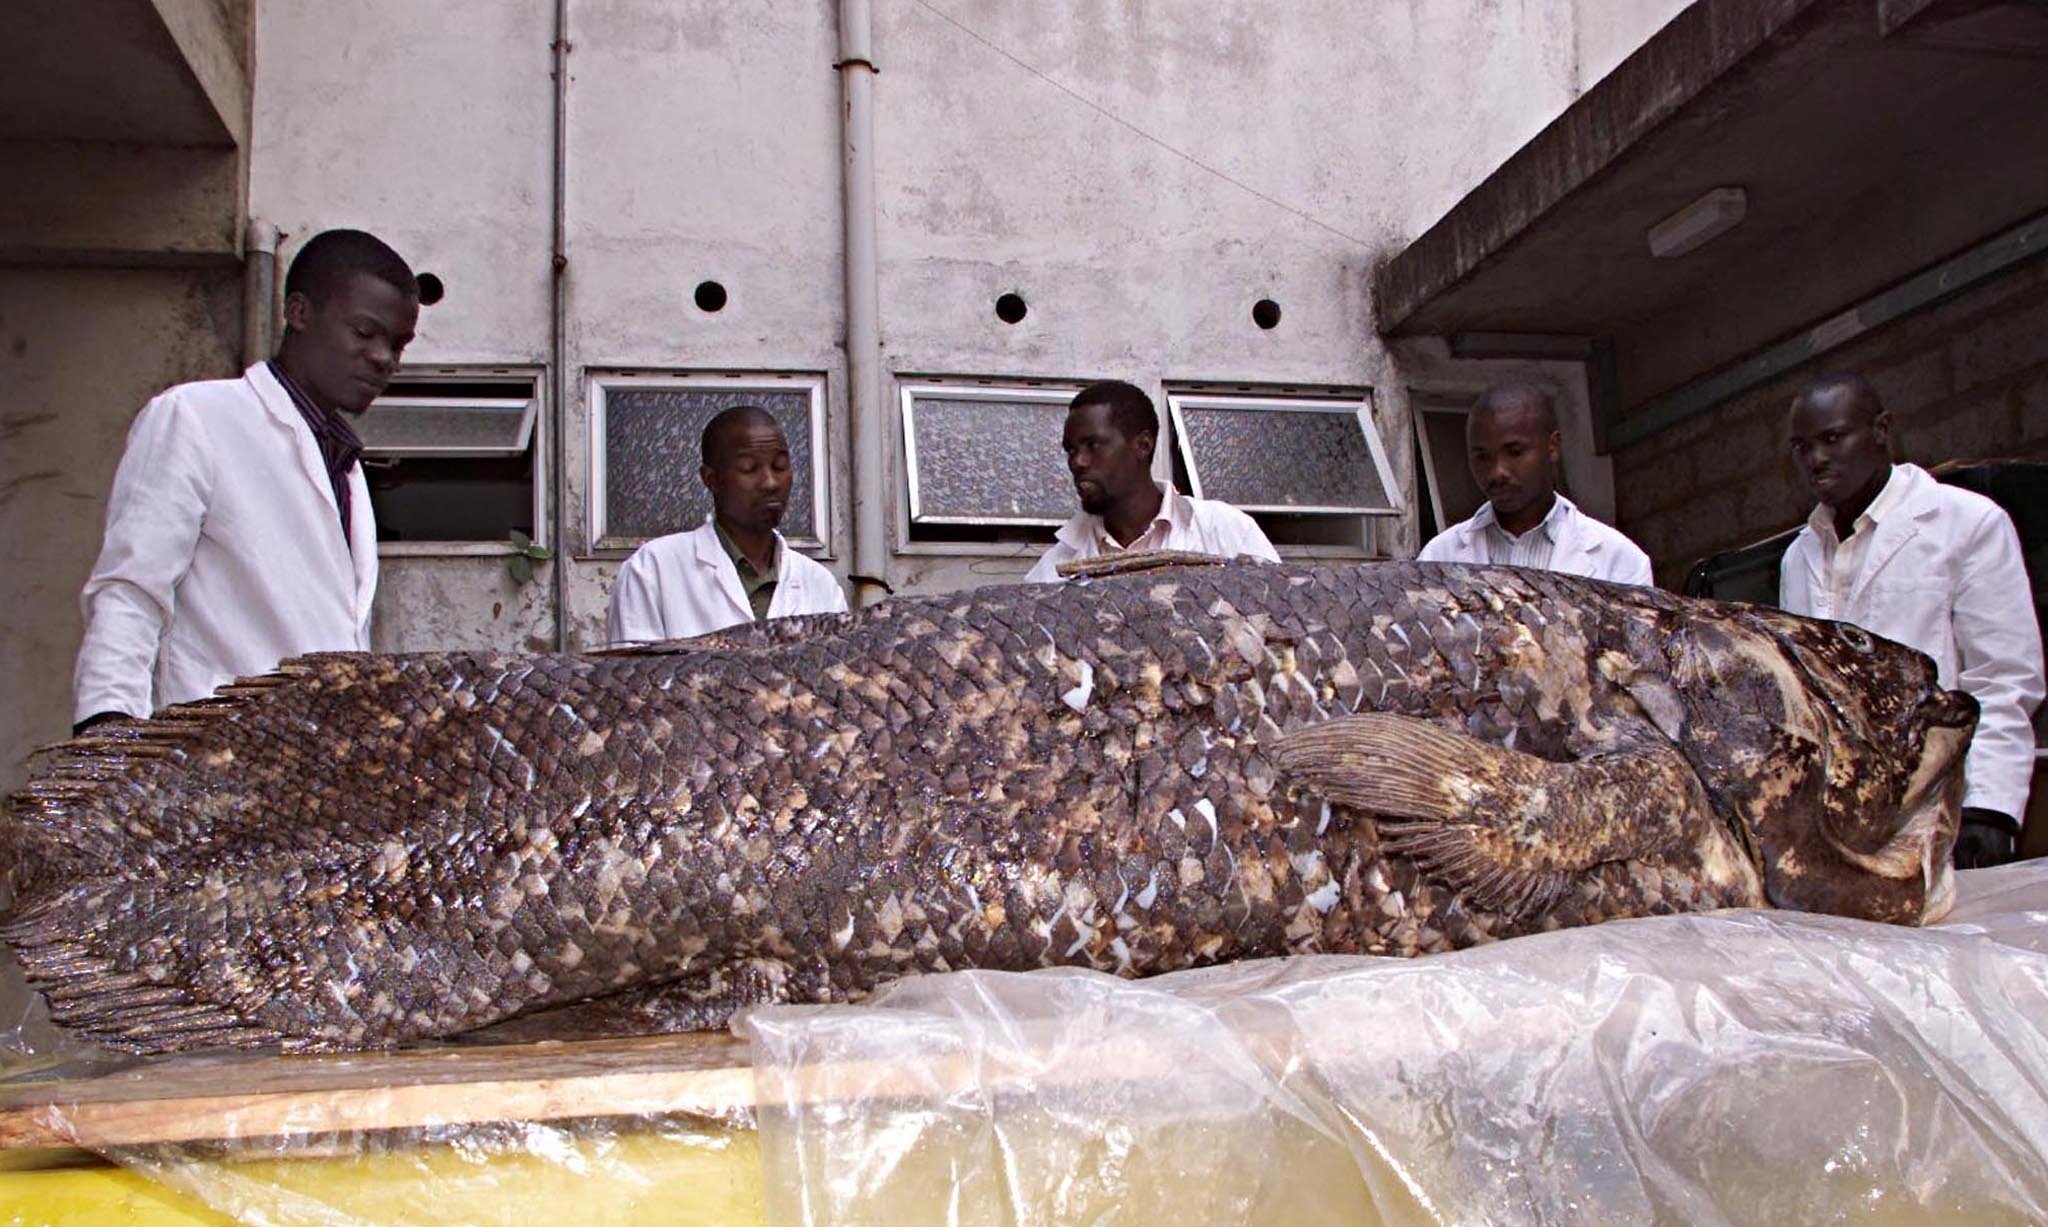 Department of fish studies personnel at the National Museum of Kenya displays a coelacanth weighing 77 kilograms (169 pounds) and measuring 1.7 meters (5.5 feet) that was caught by Kenyan fishermen in the coastal town of Malindi in April 2001, in Kenya, Nov. 19, 2001. (Reuters File Photo)